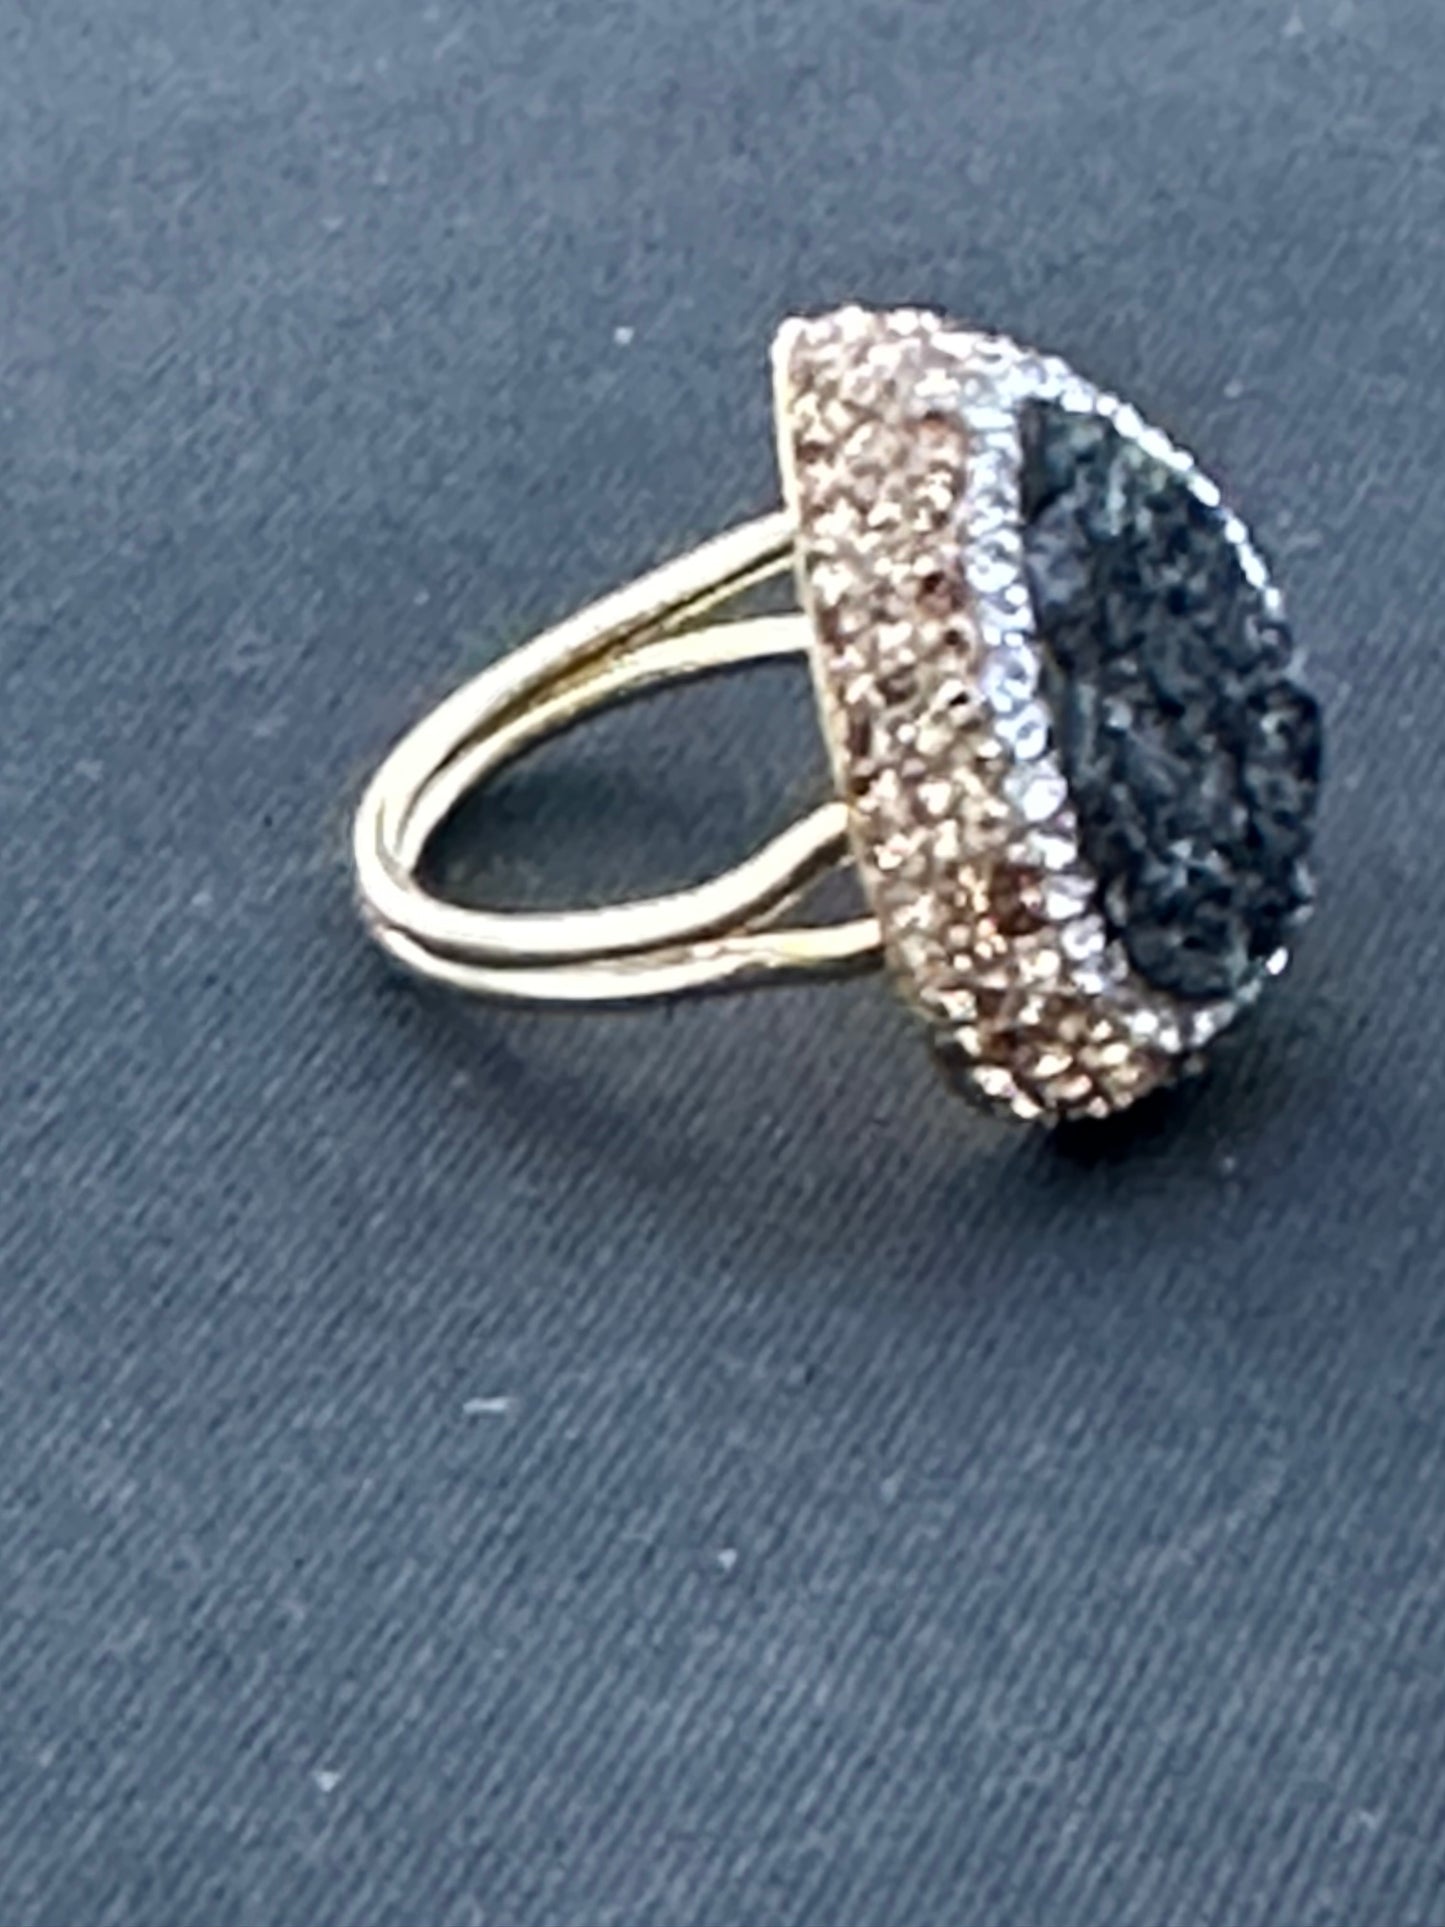 Druzy Quartz Cubic Zirconia Marcasite and Sterling Silver Adjustable Ring